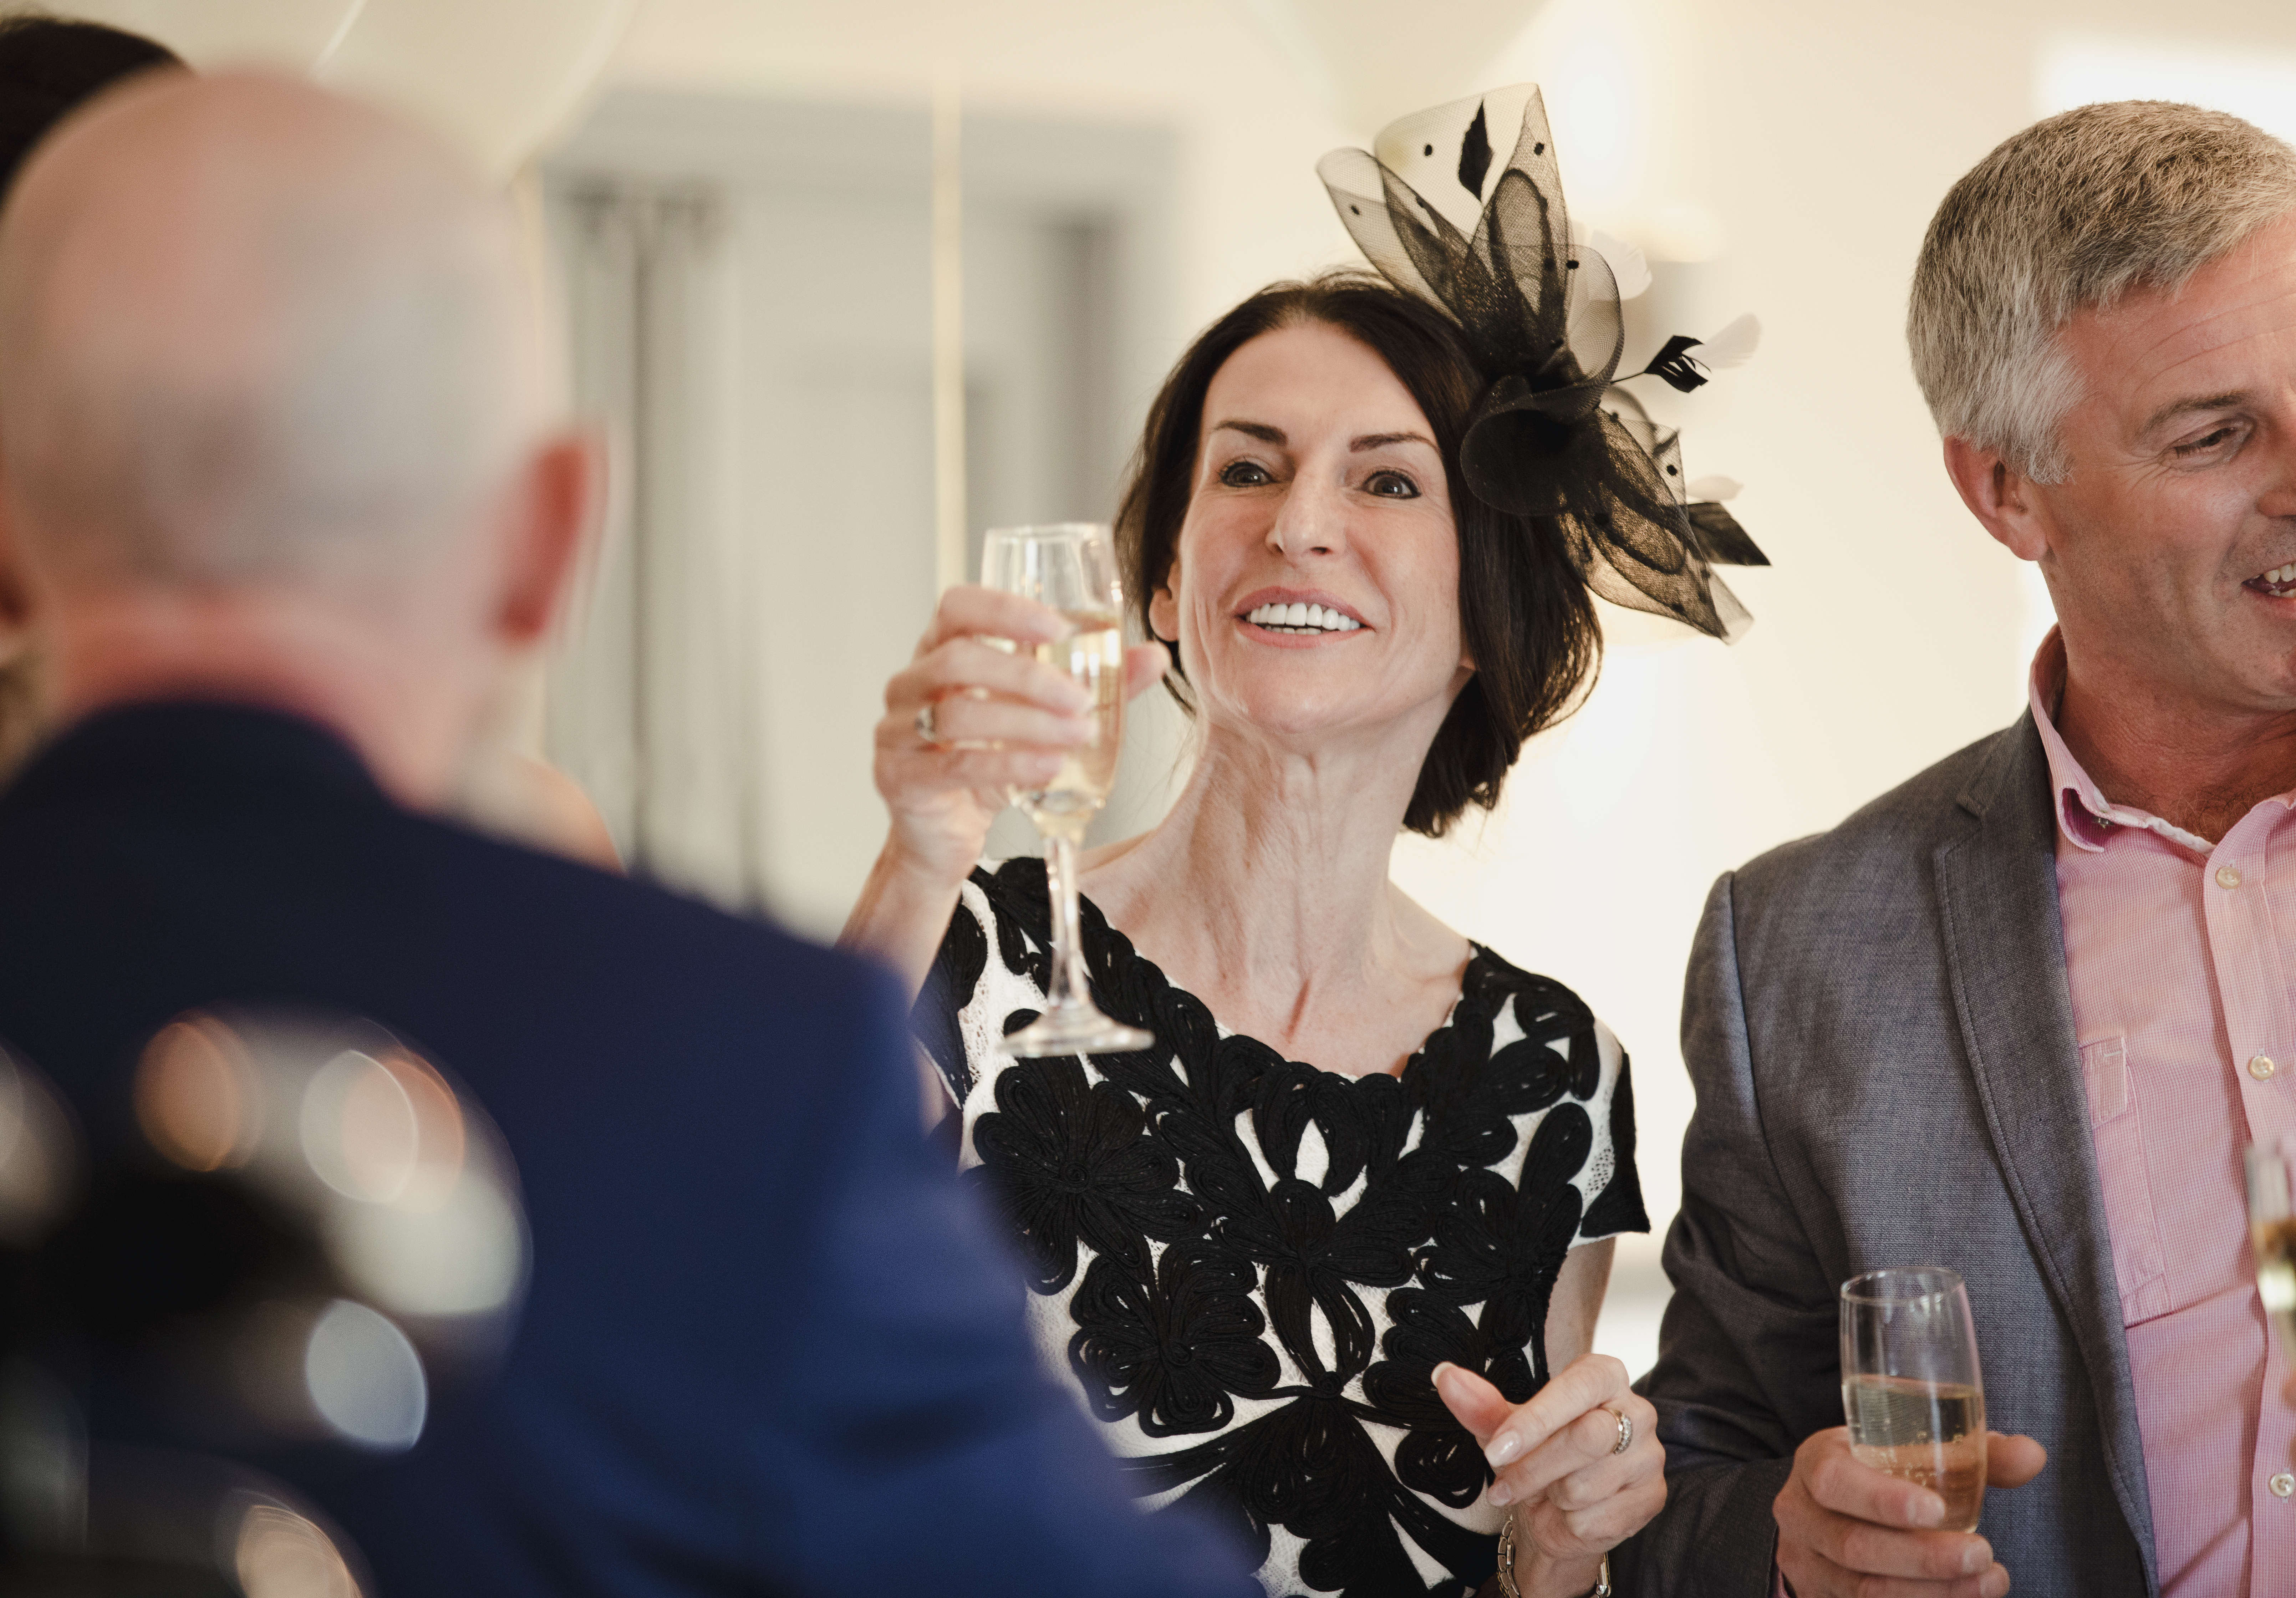 Bride's parents toasting to their daughter and son-in-law on their wedding day | Source: Shutterstock